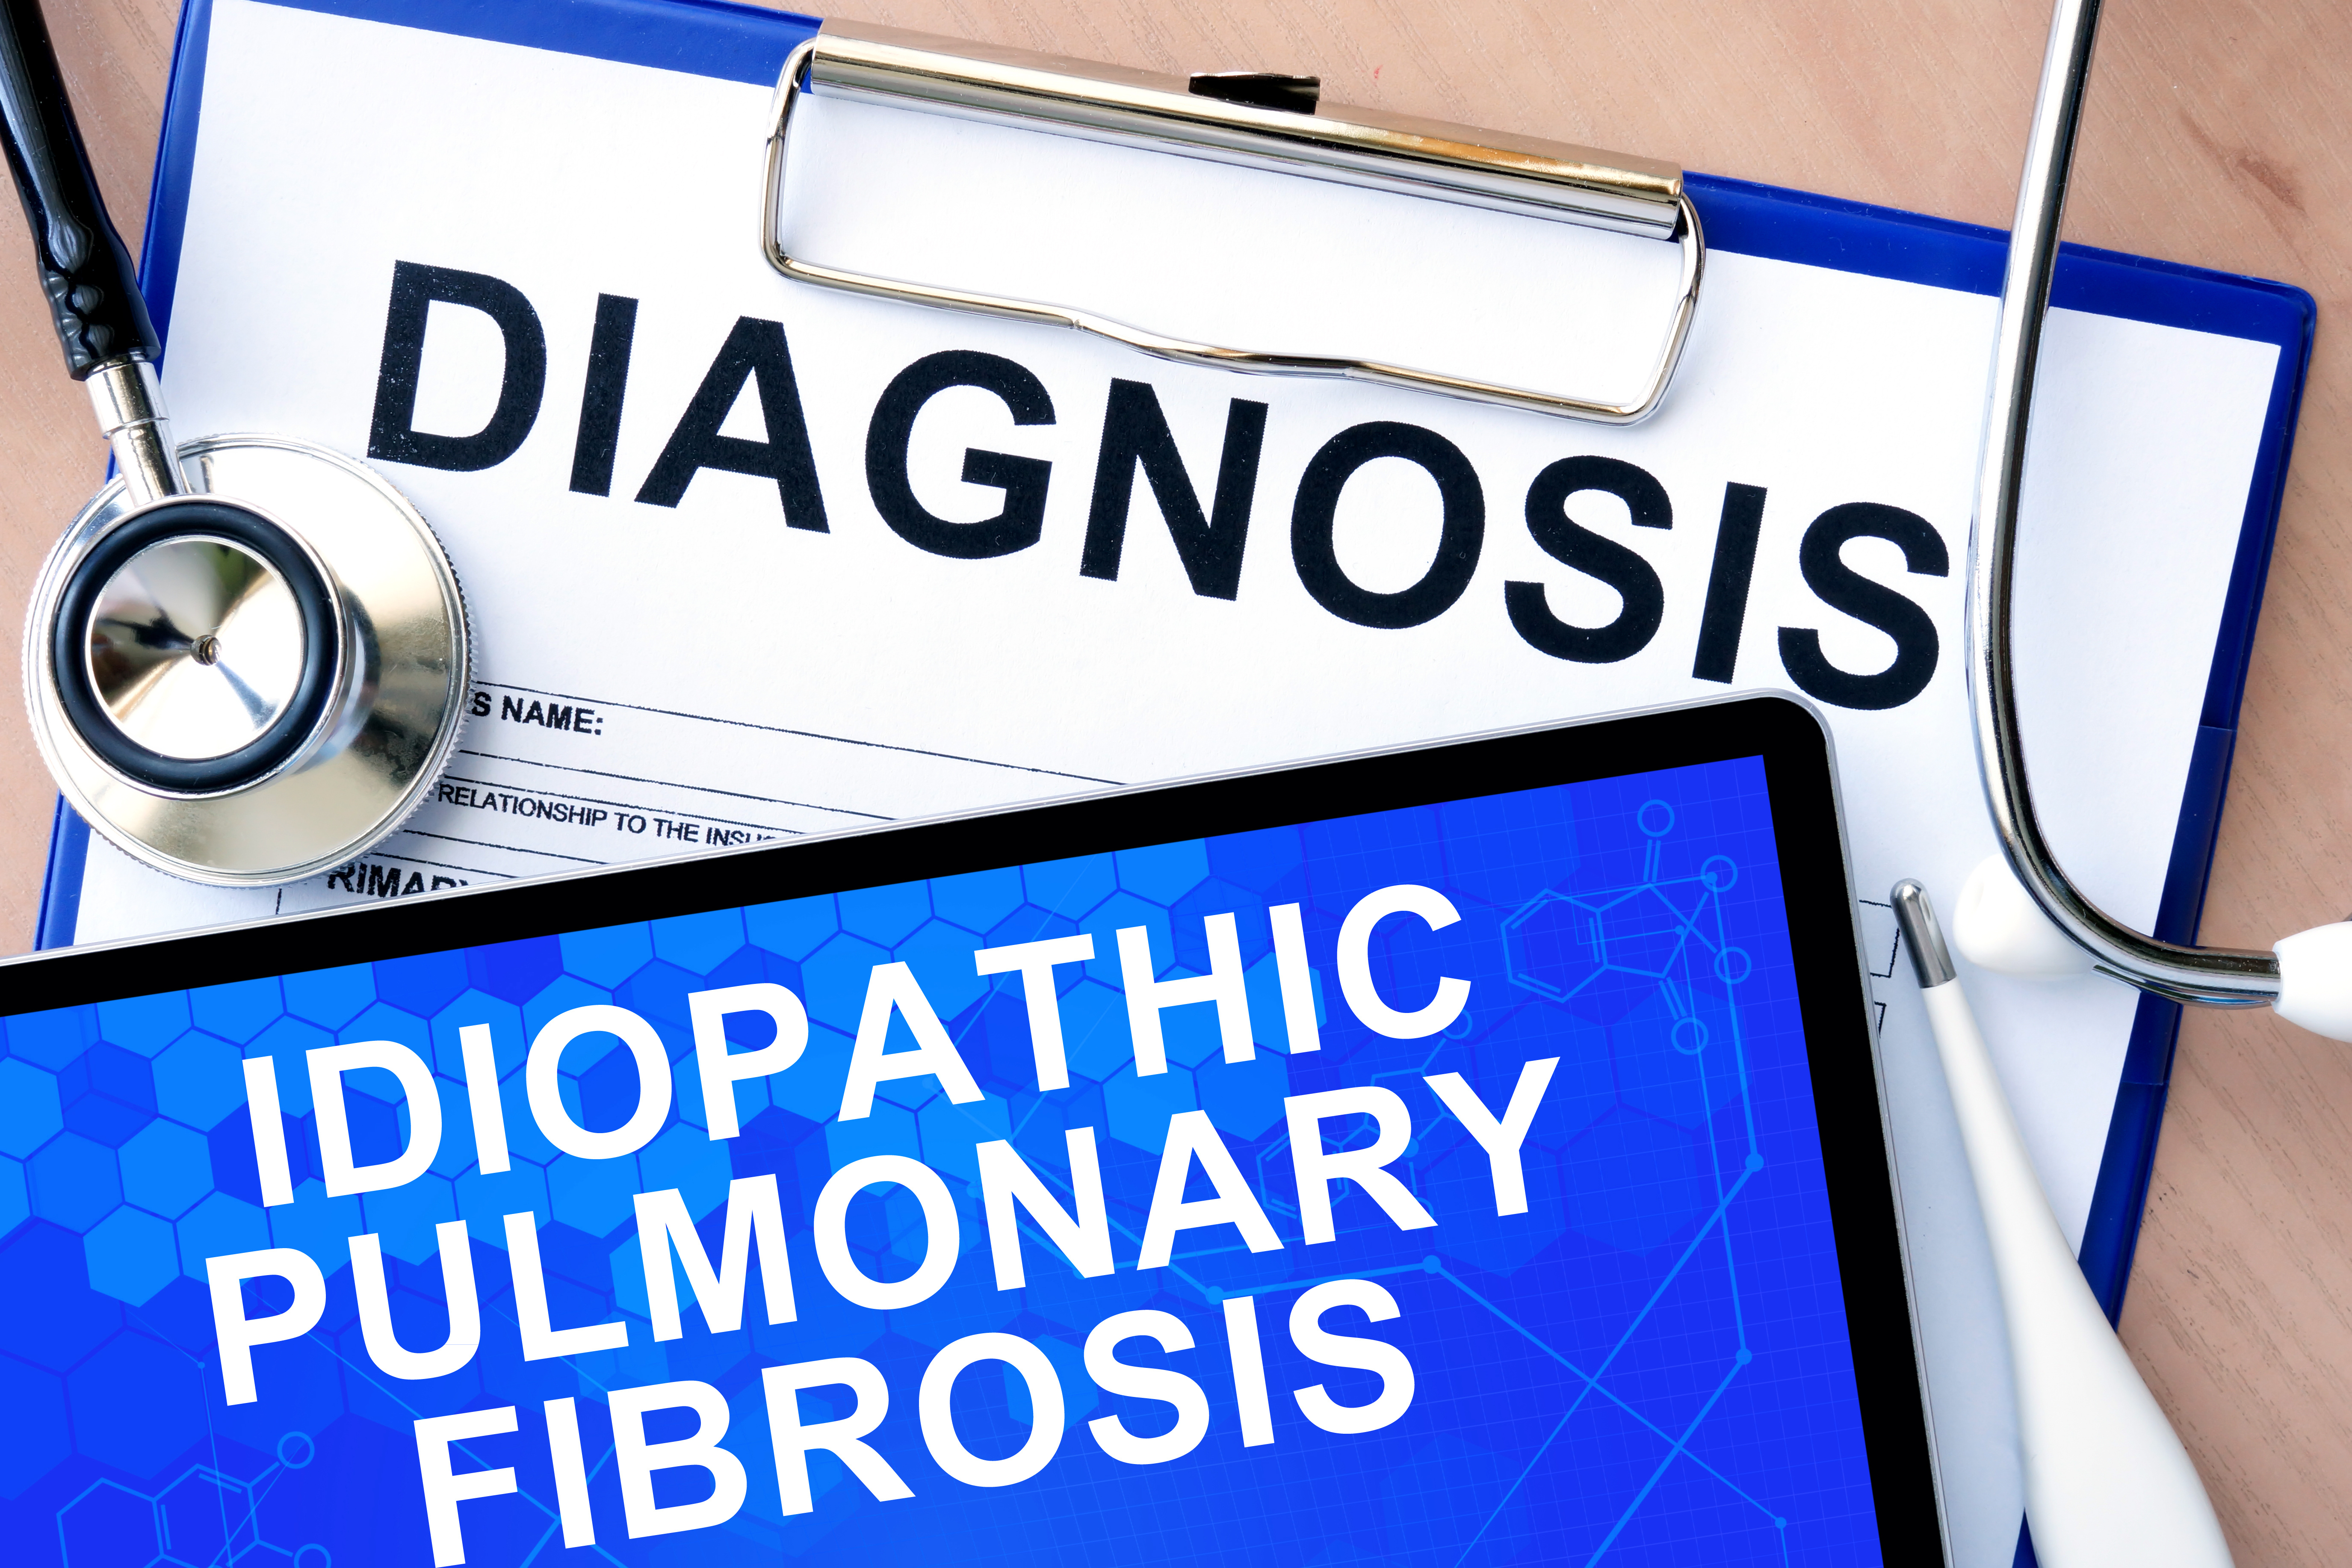 tablet with Idiopathic pulmonary fibrosis